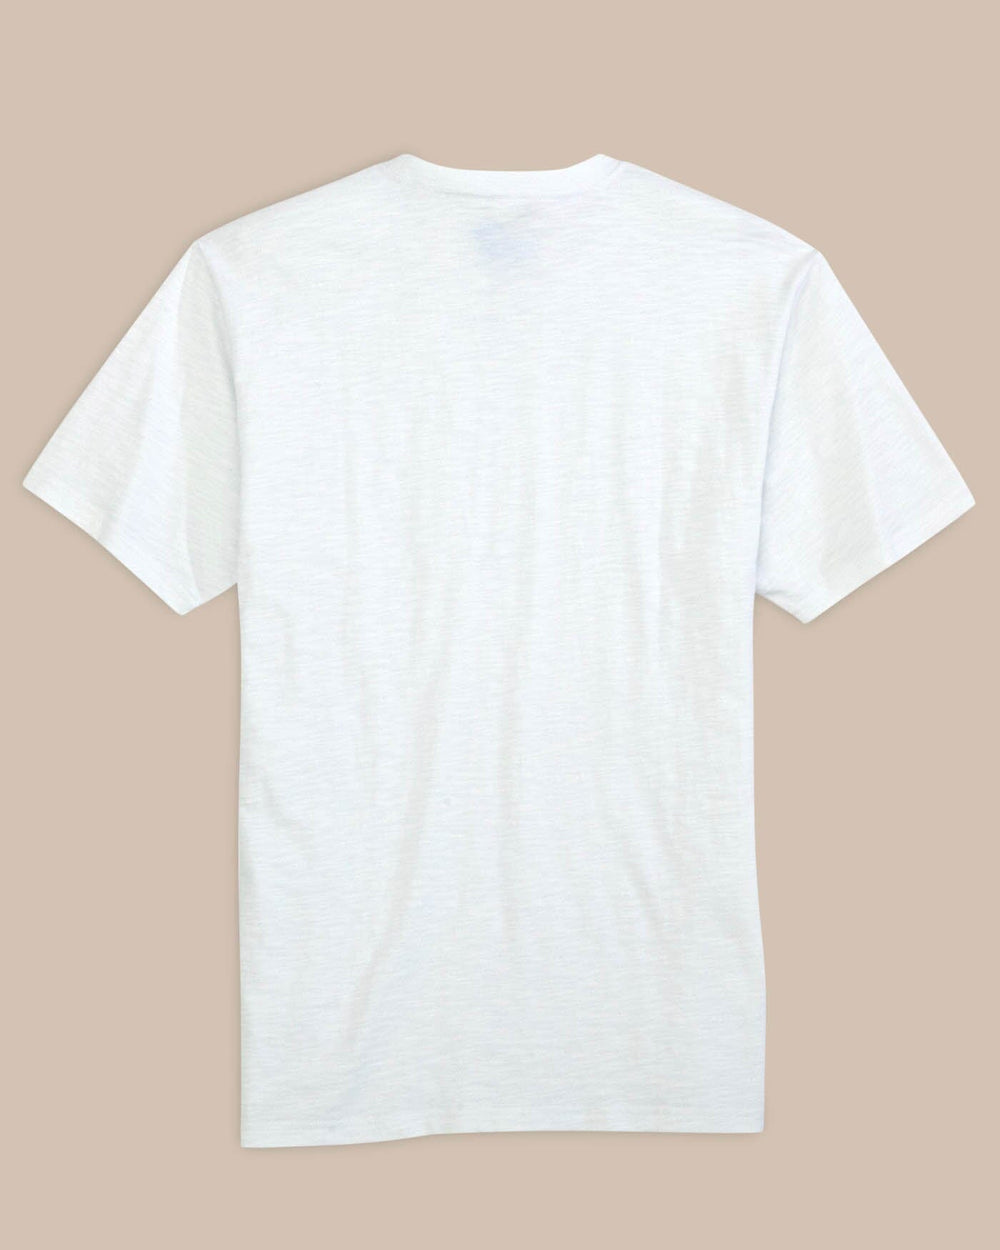 The back of the Men's Sun Farer Short Sleeve T-Shirt by Southern Tide - Classic White